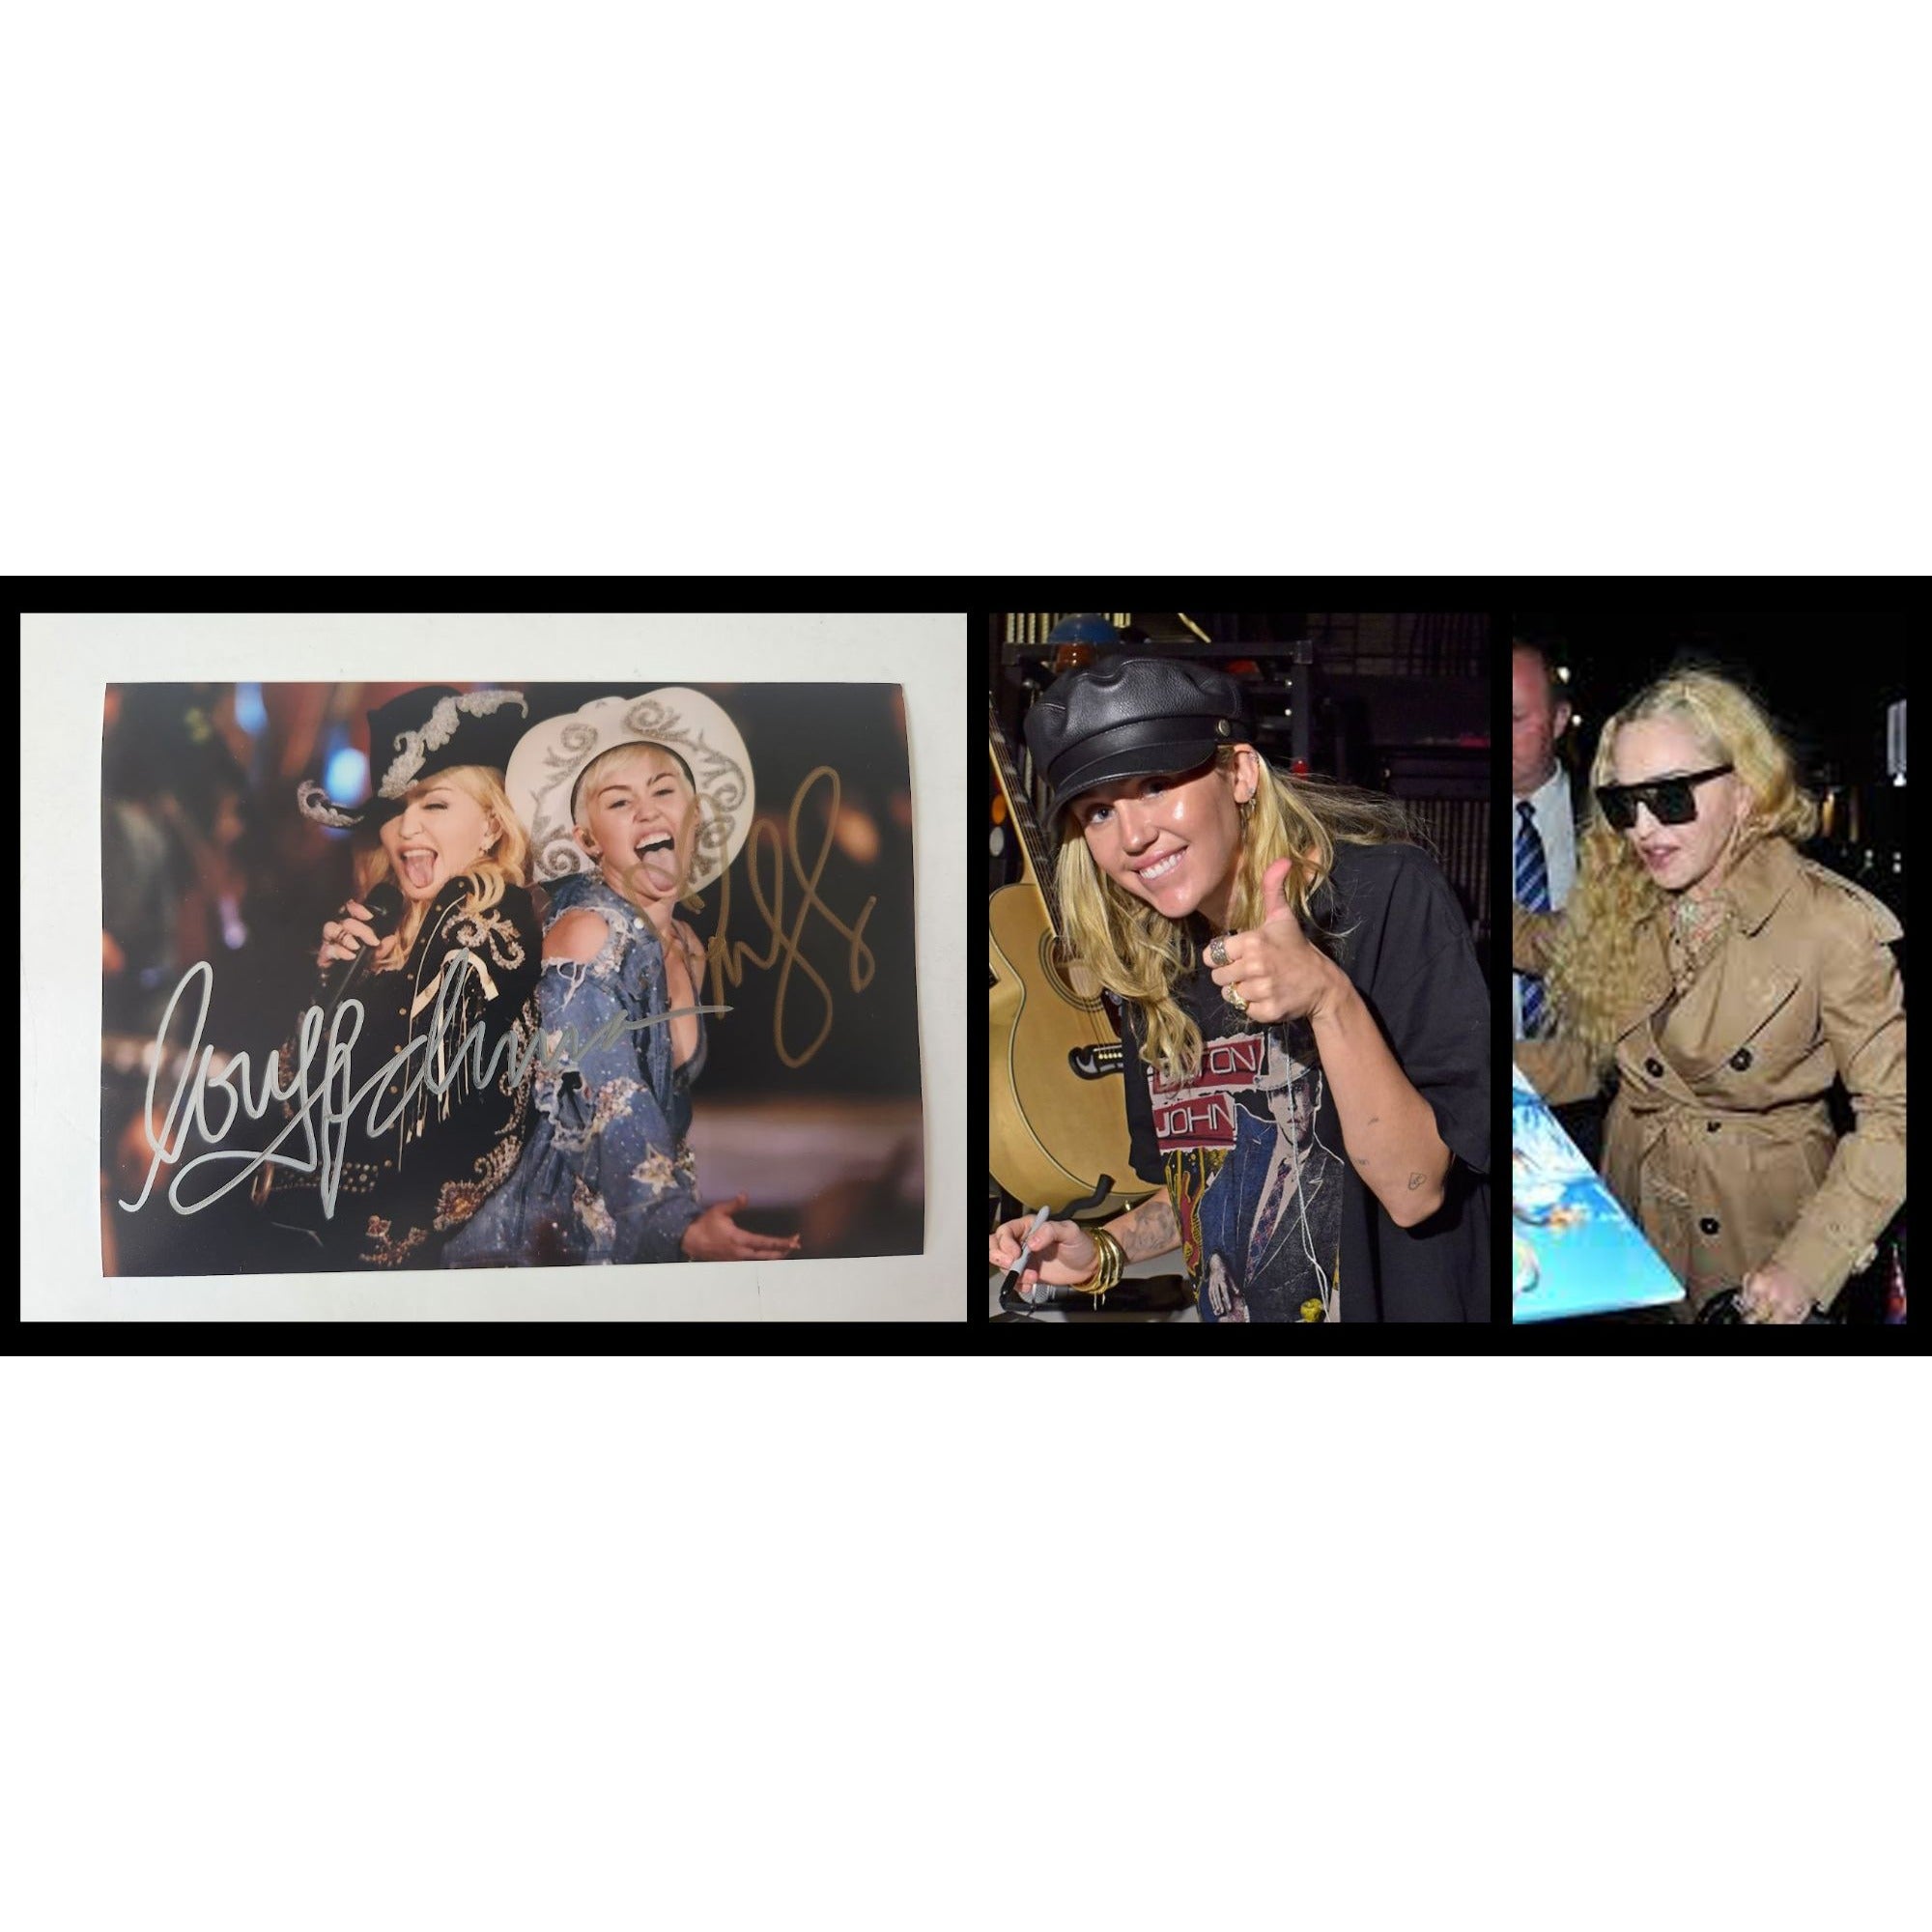 Madonna Ciccone Miley Cyrus 5x7 photo signed with proof